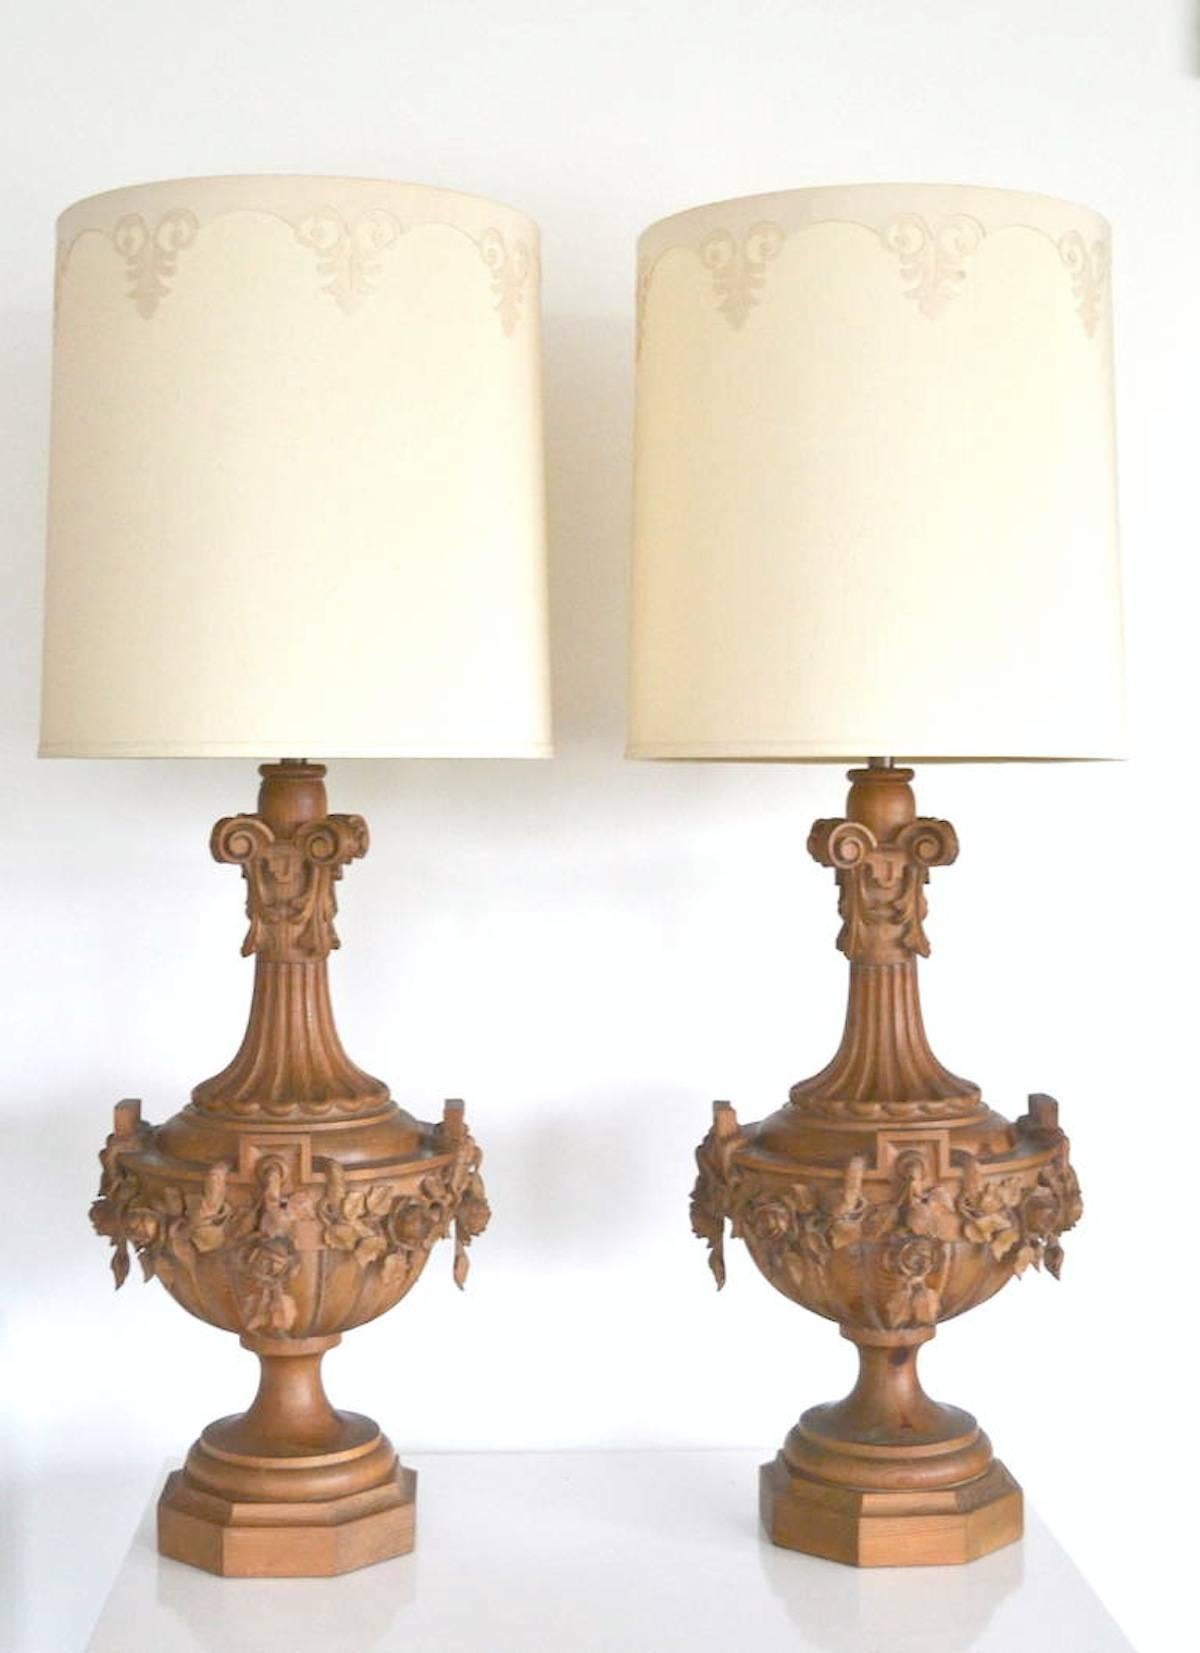 Pair of Hollywood Regency Carved Wooden Urn Form Table Lamps by Marbro 1